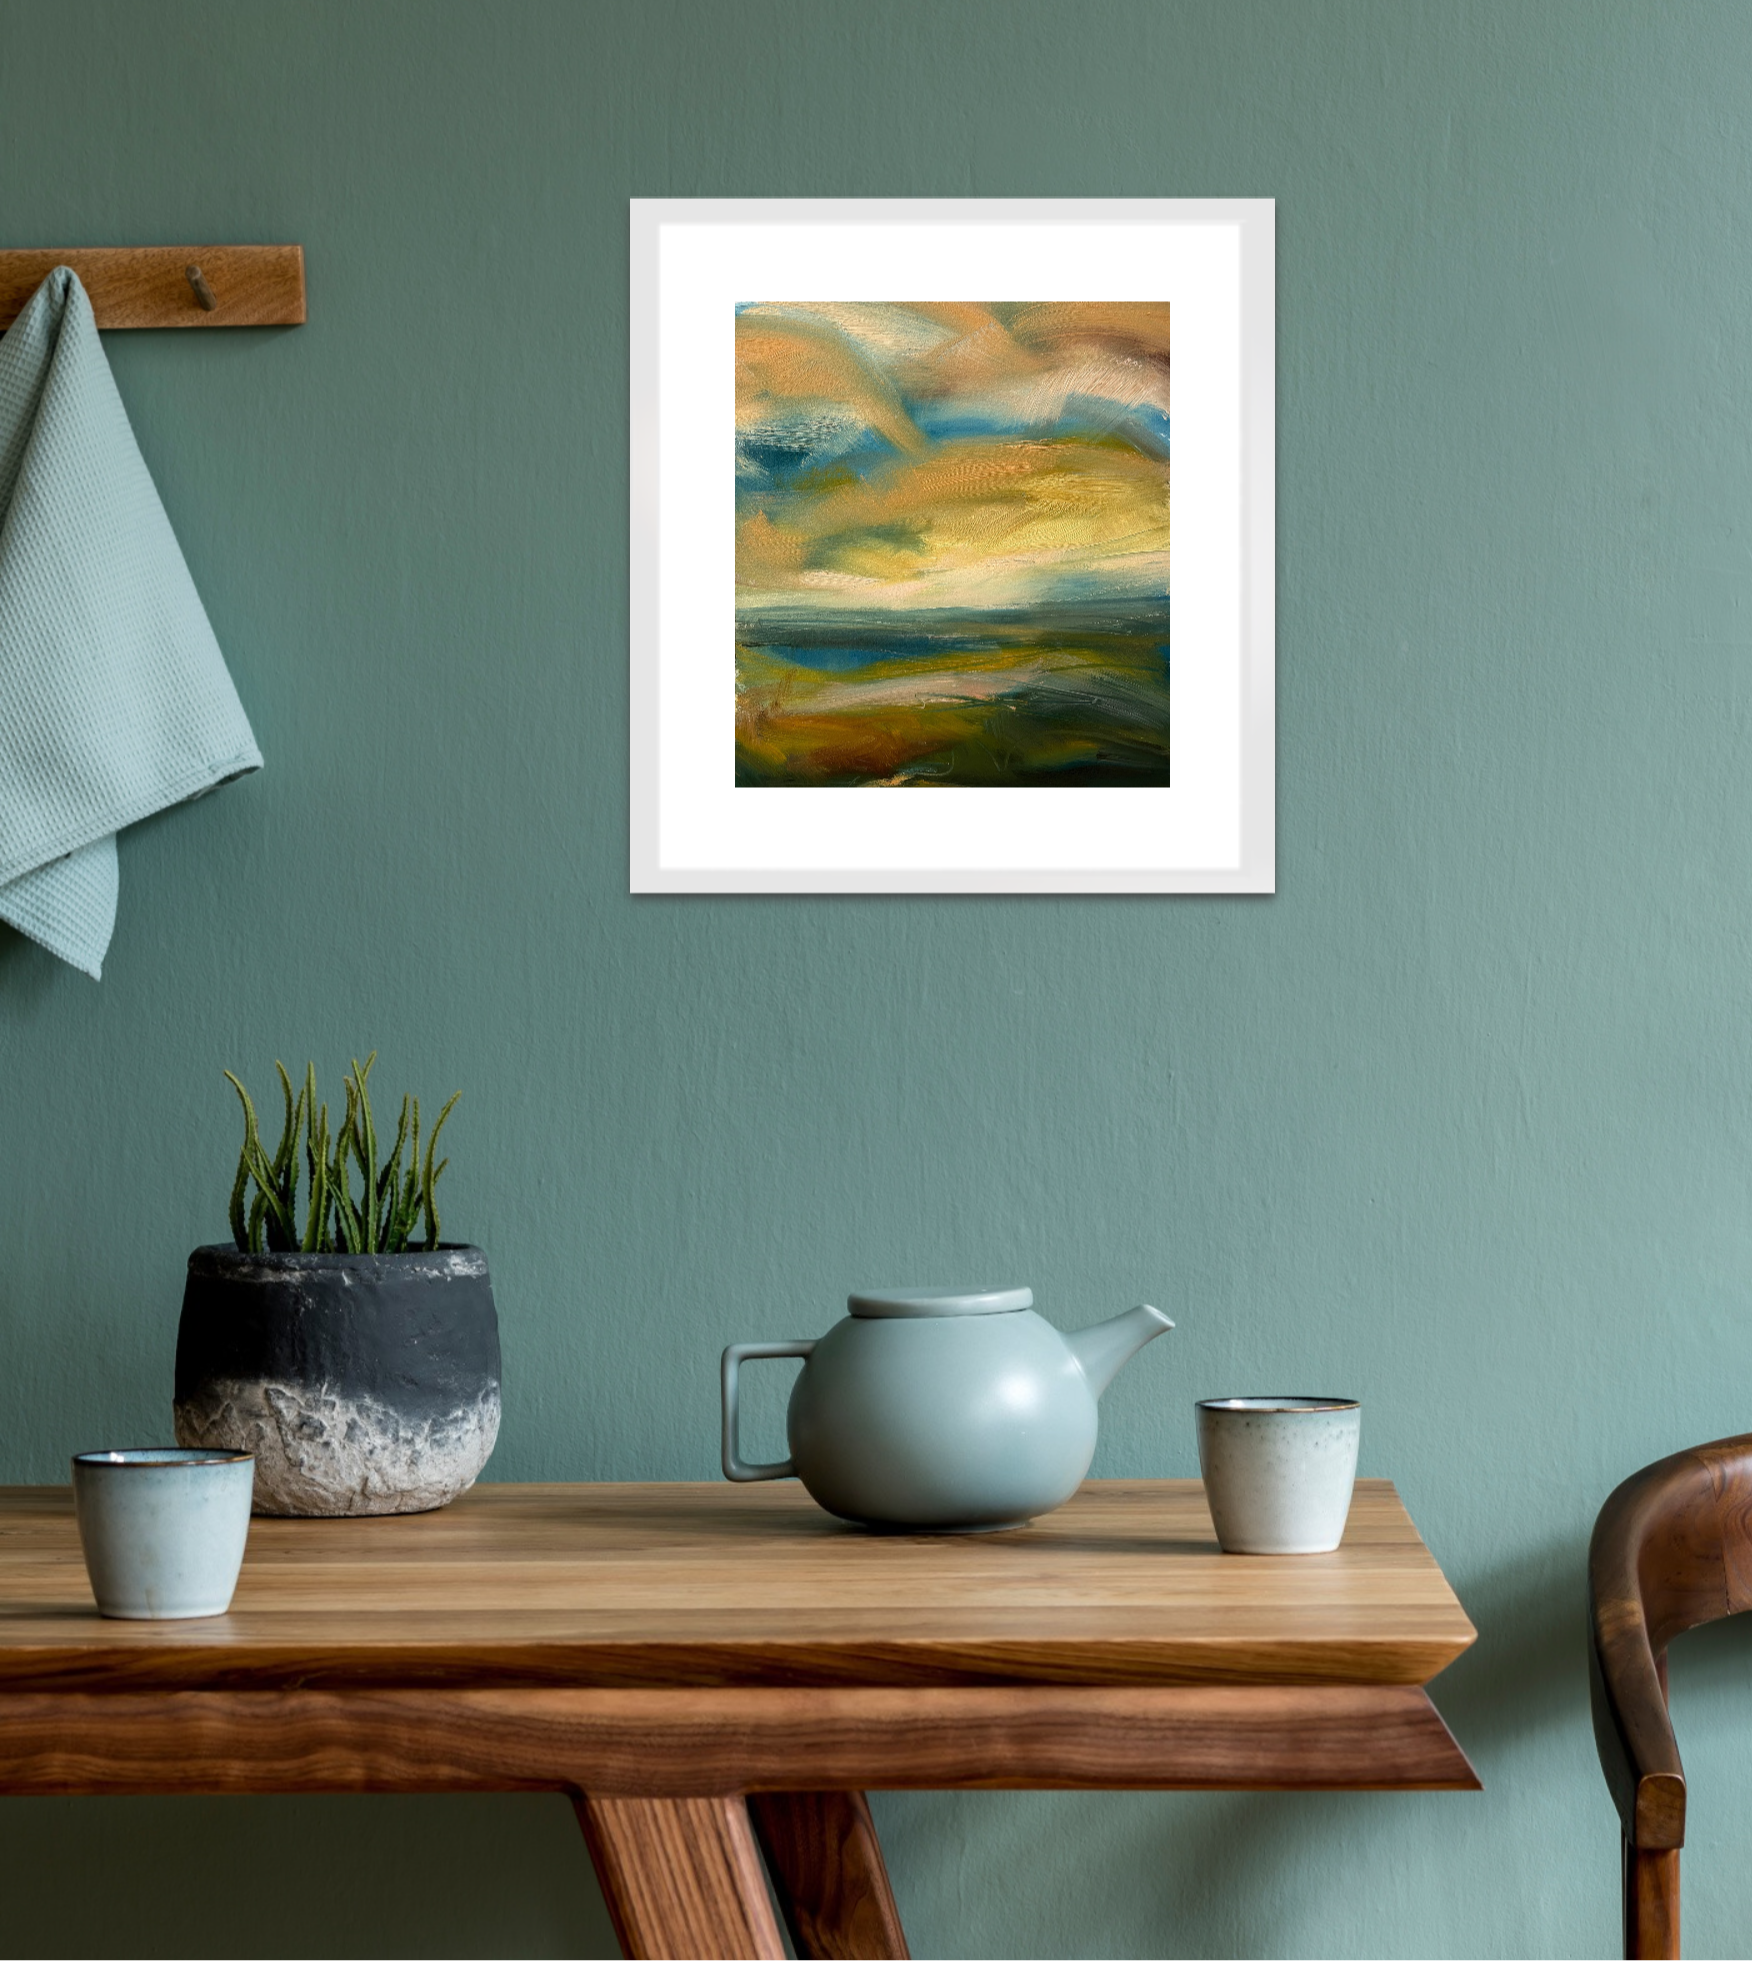 Let My Mind Roam Free Original Oil On Paper Landscape Painting In Room Setting 1